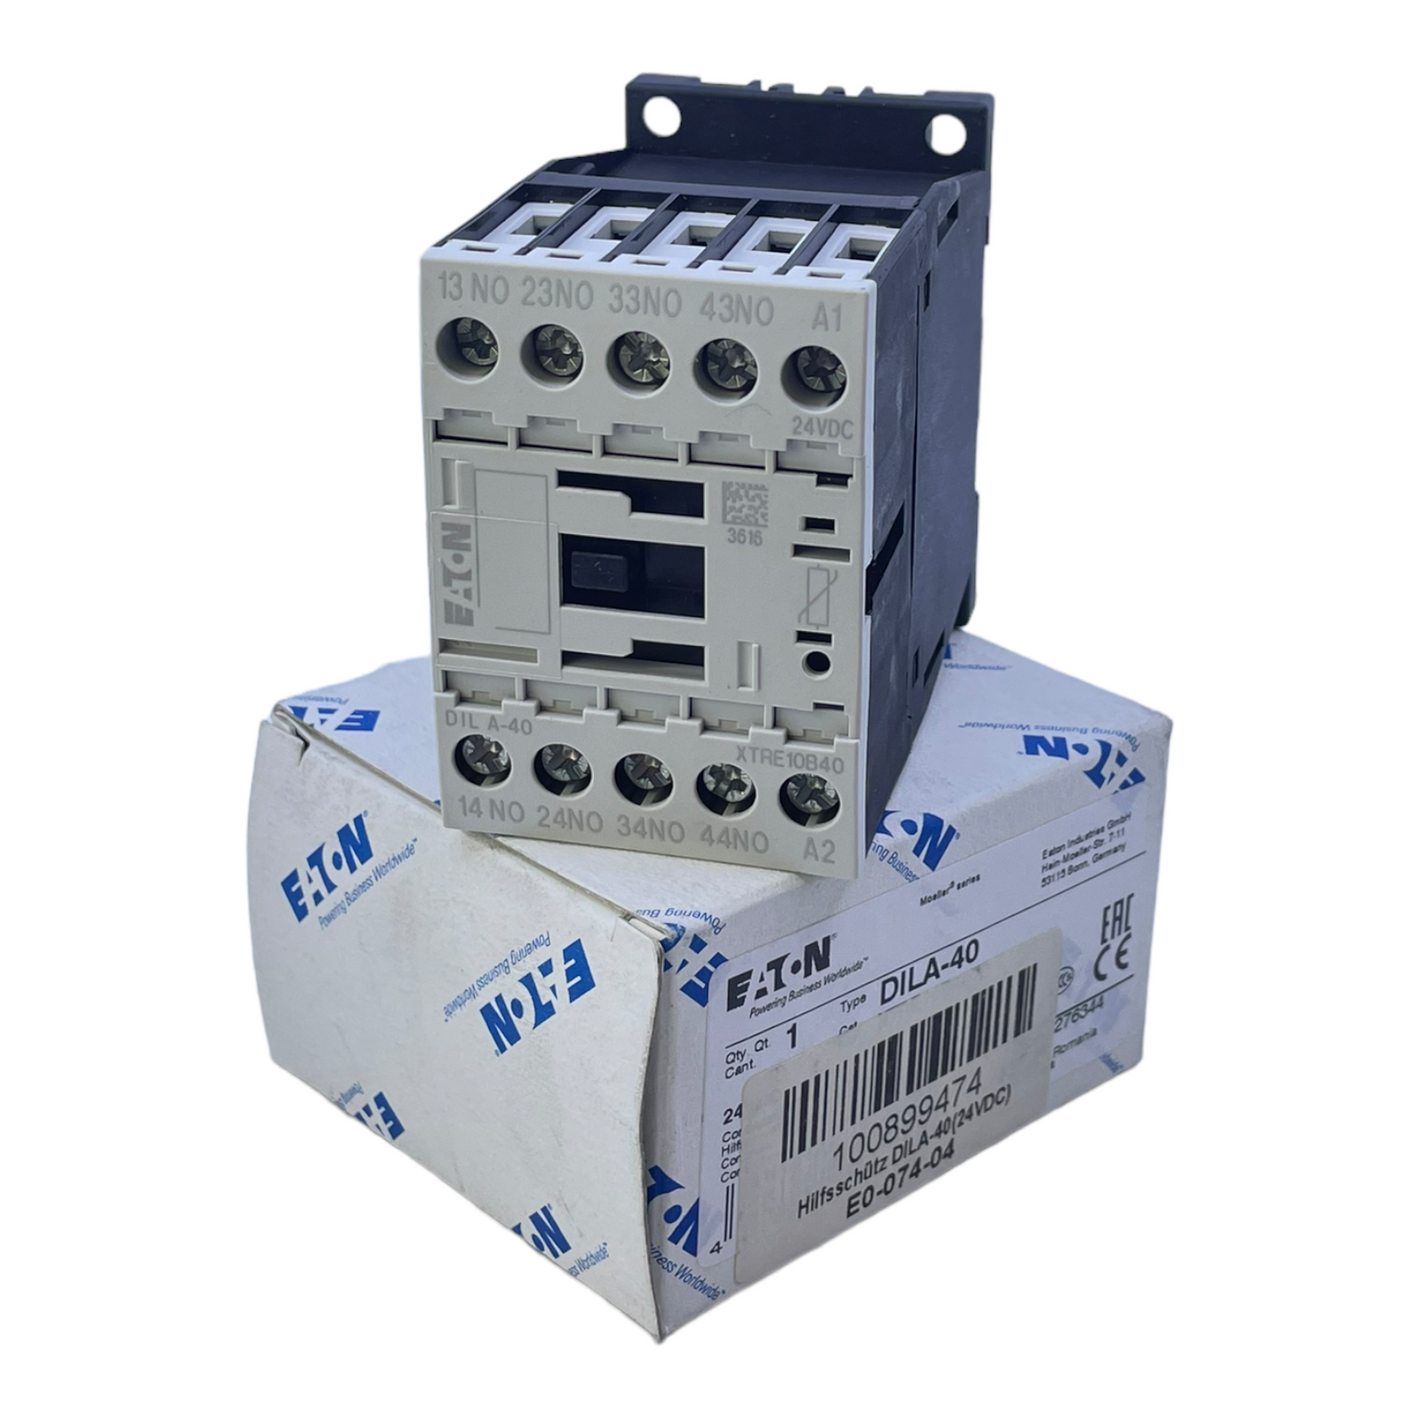 Eaton DILA-40 auxiliary contactor 24V auxiliary switch for industrial use Eaton 